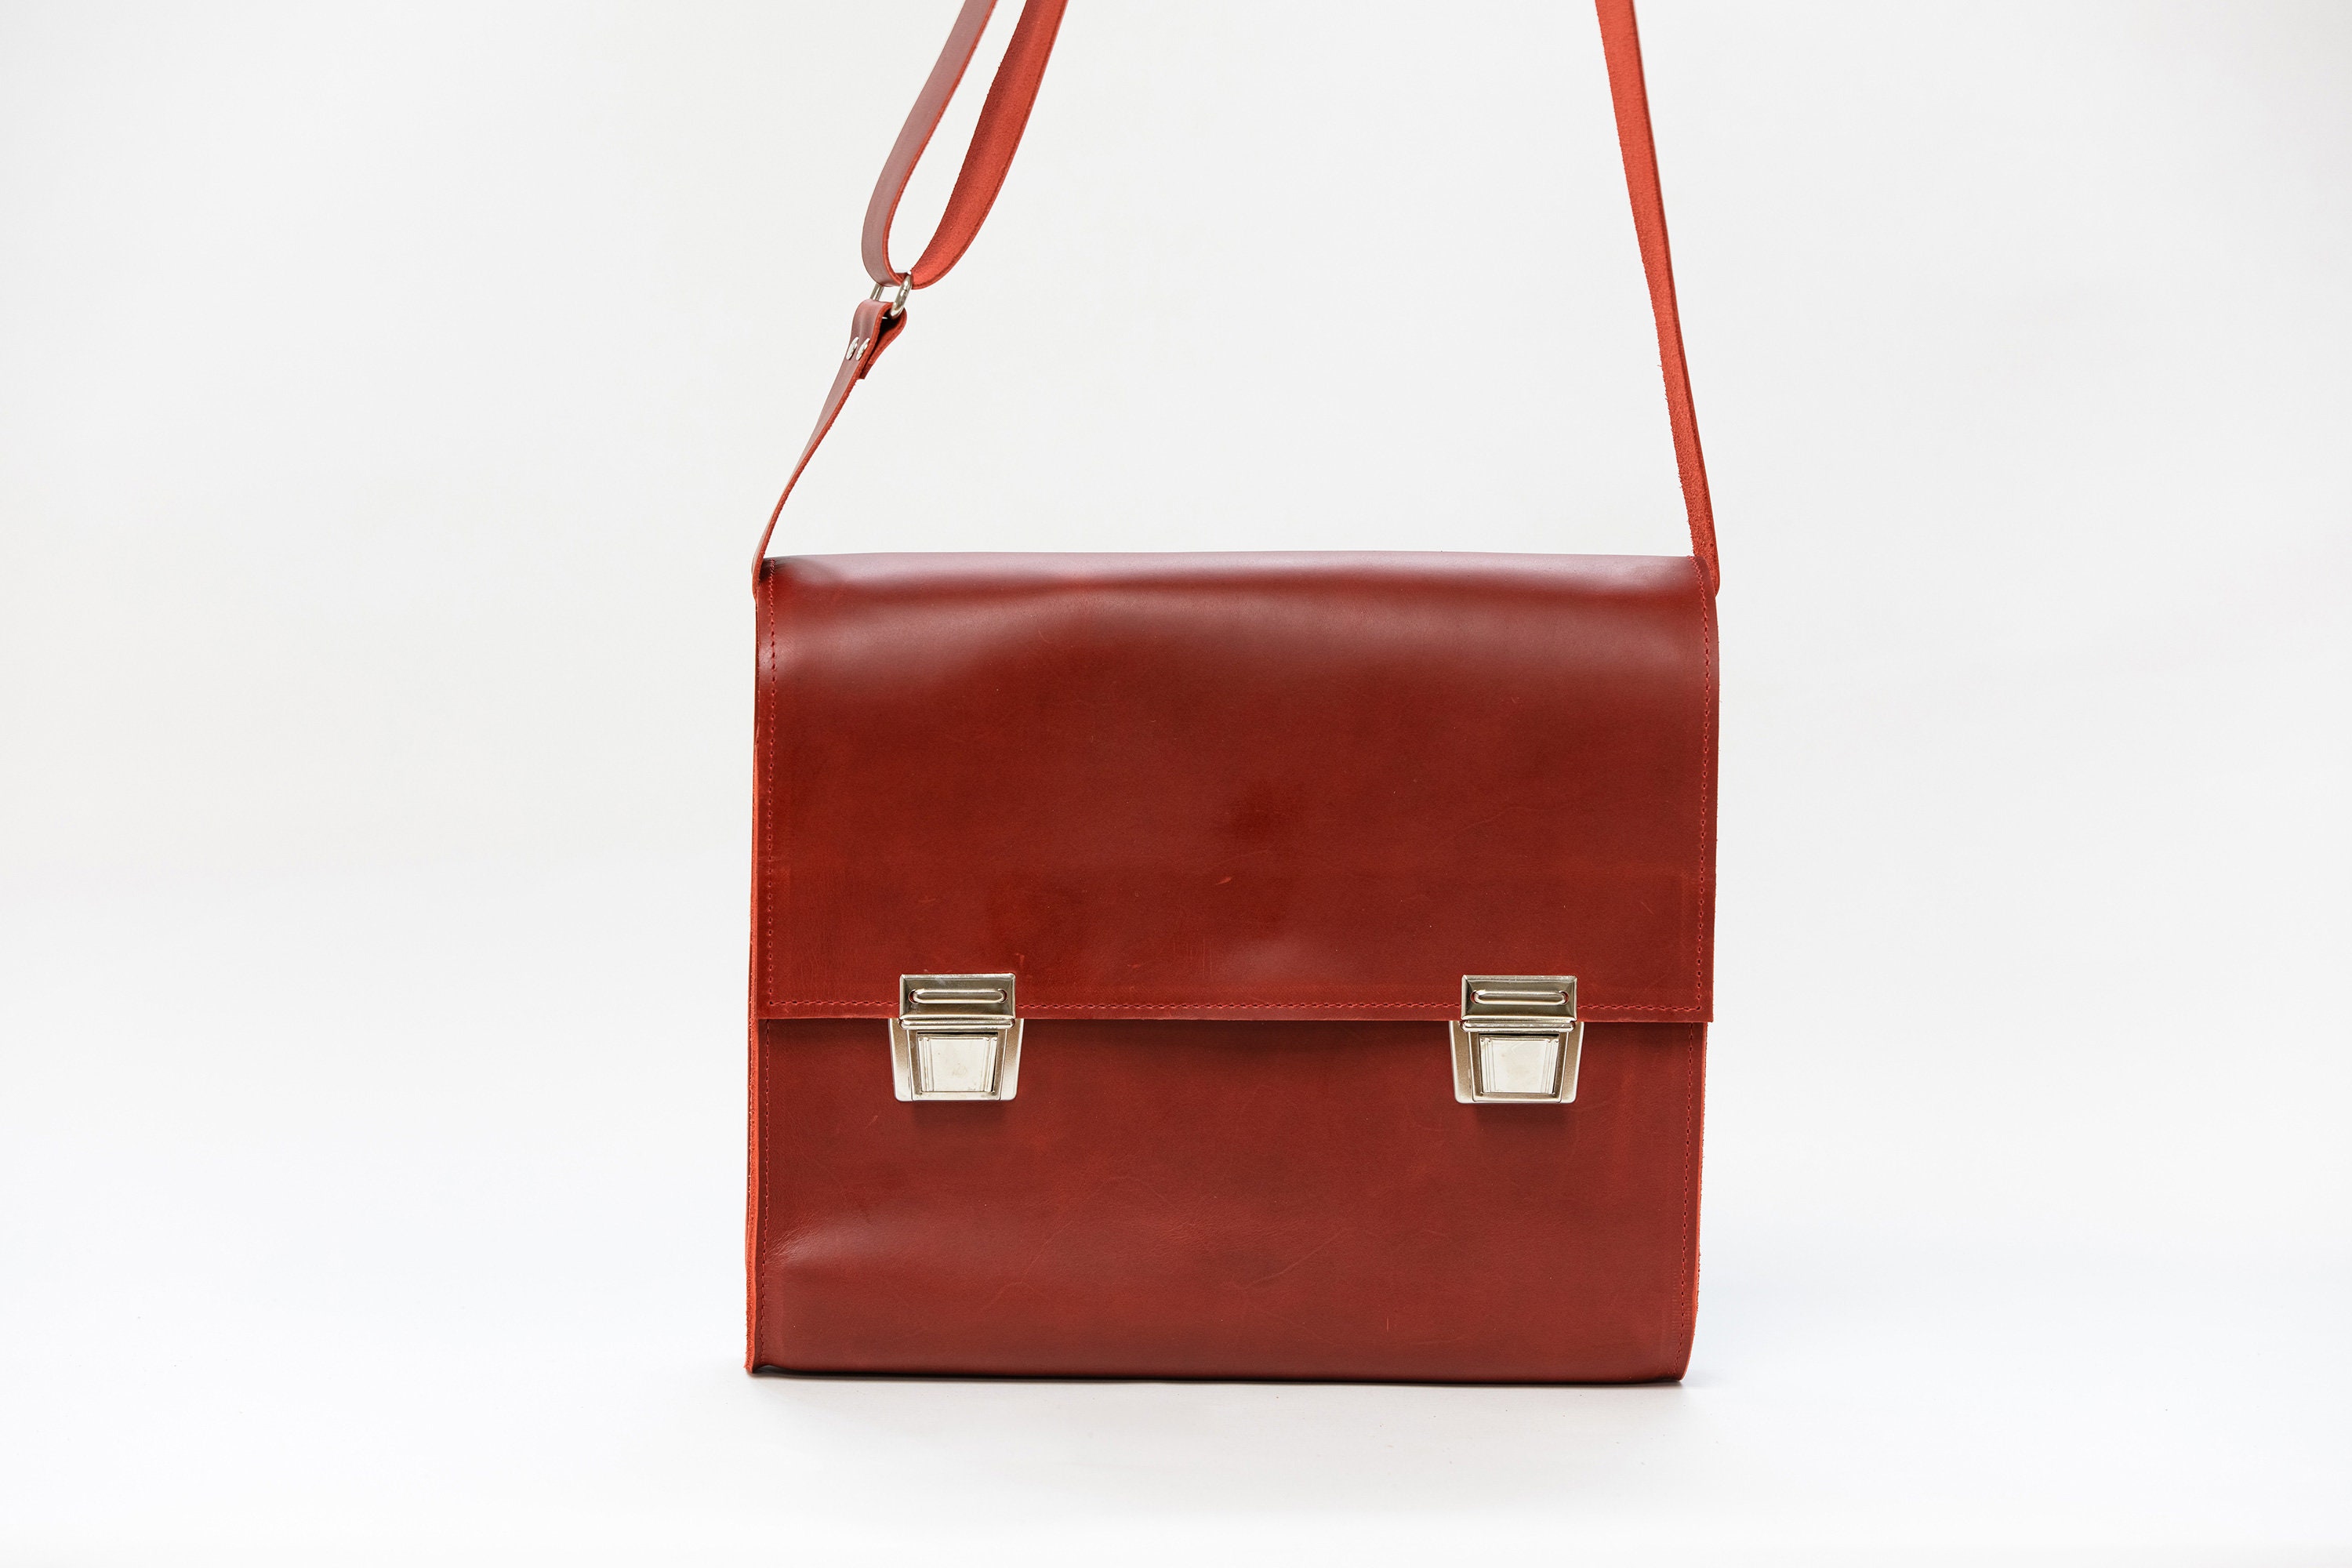 Red Laptop Bag of Haeute Finest Handwork Made in Germany - Etsy